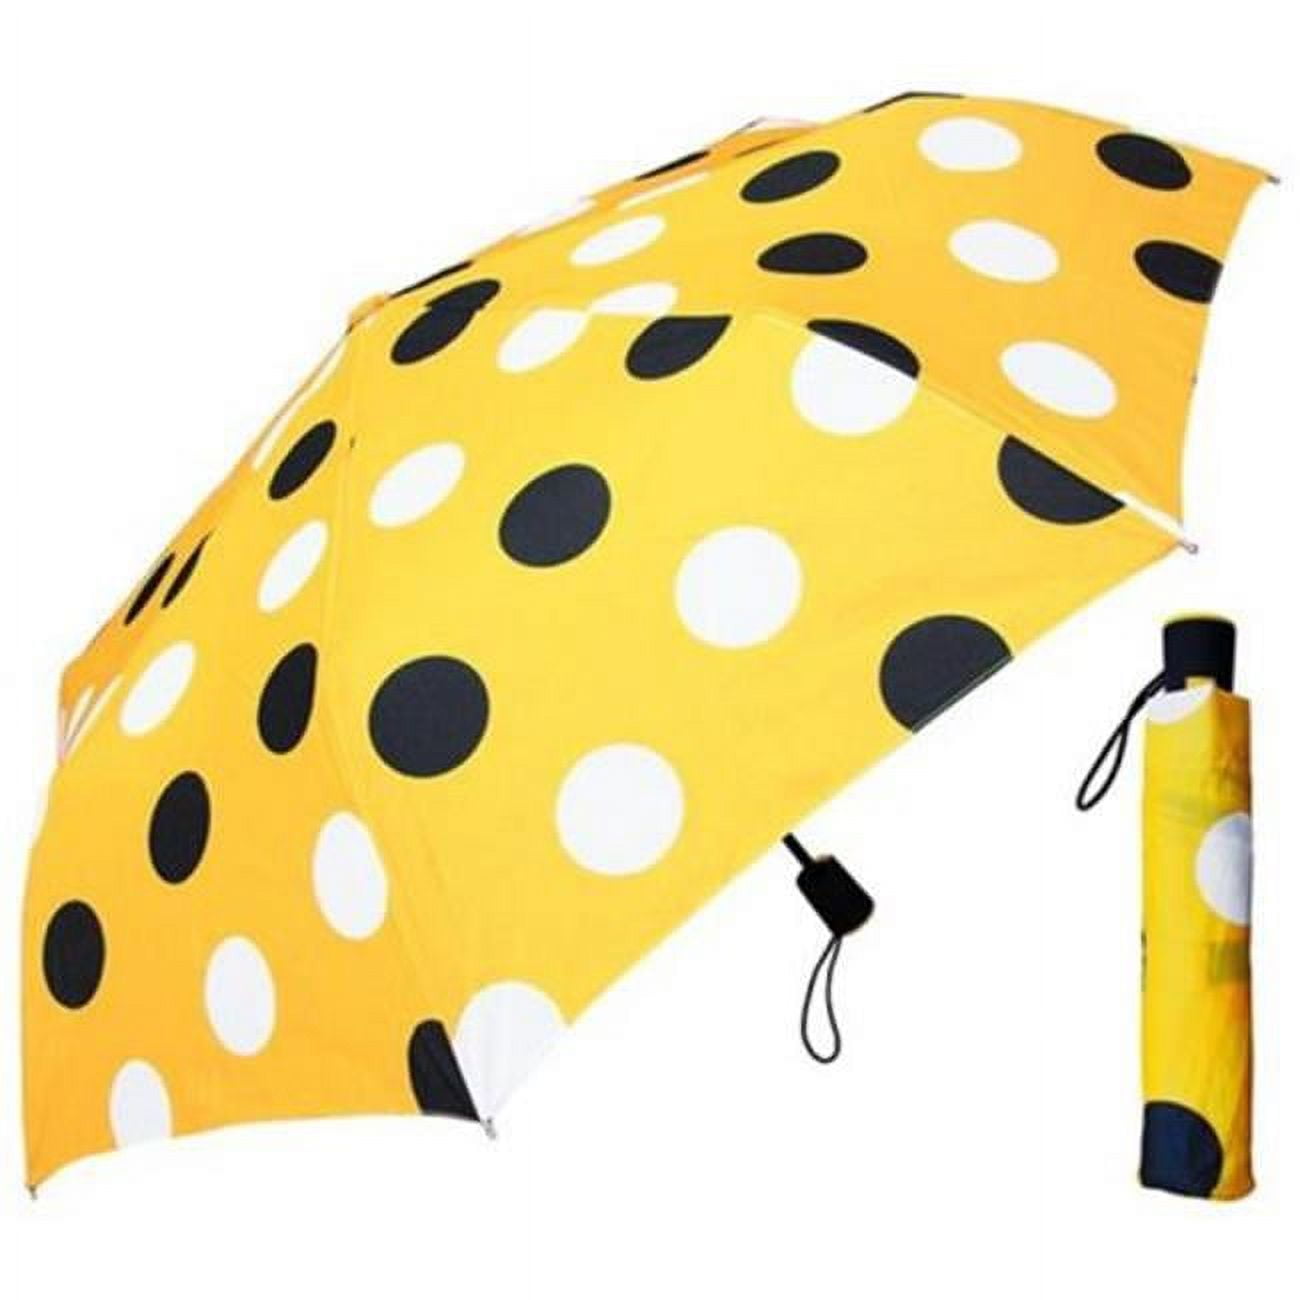 Picture of Conch F5302 Yellow Supermini in Polka Dot Print, Yellow